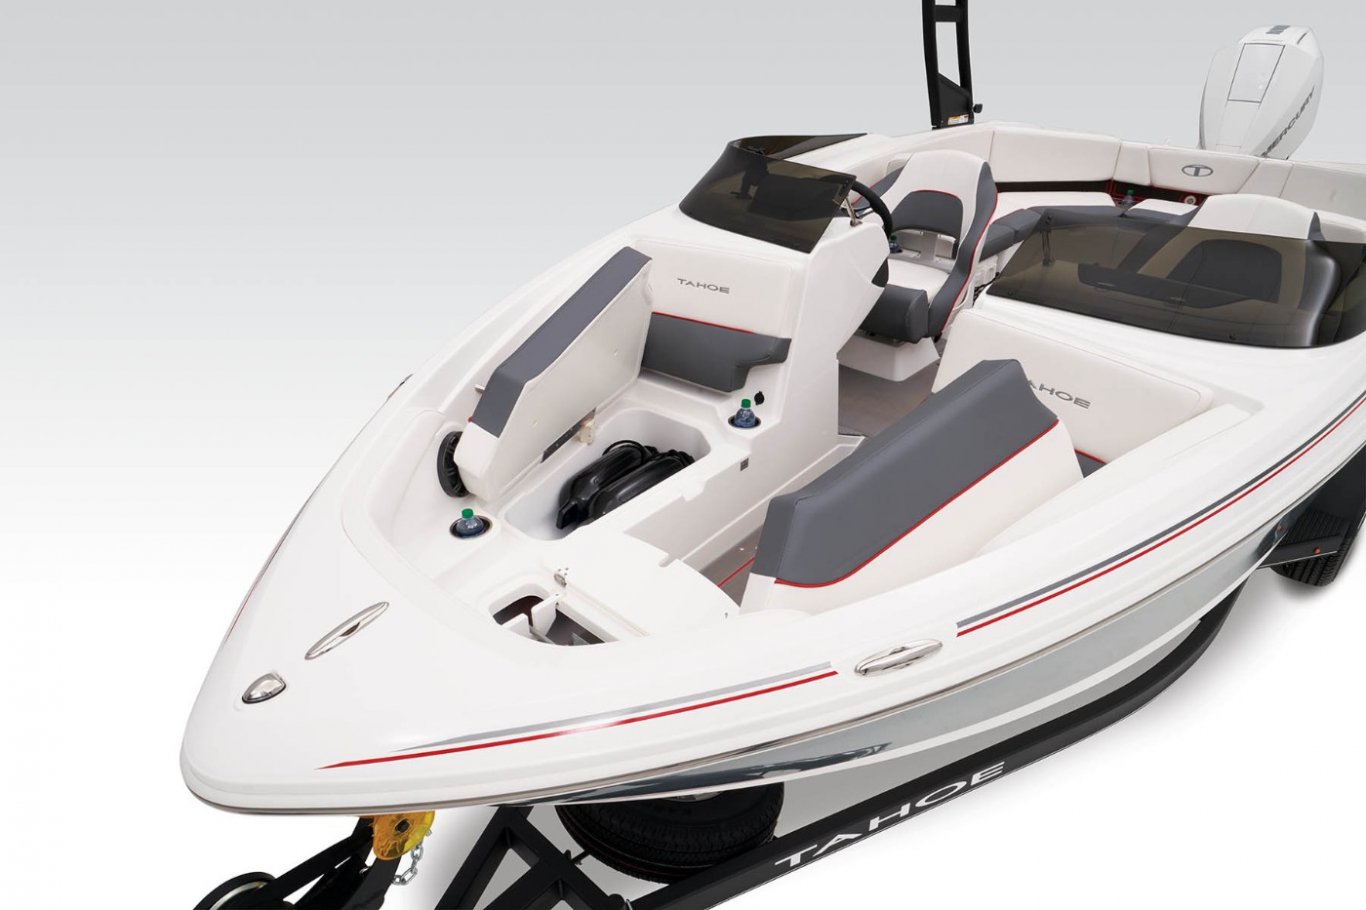 https://www.tahoeboats.com/content/dam/wrmg/tahoe/2023/sport-boats/210-s-limited/features/23_TA_210S-LIMITED_FA003.jpg/jcr:content/renditions/cq5dam.web.1400.1400.jpeg